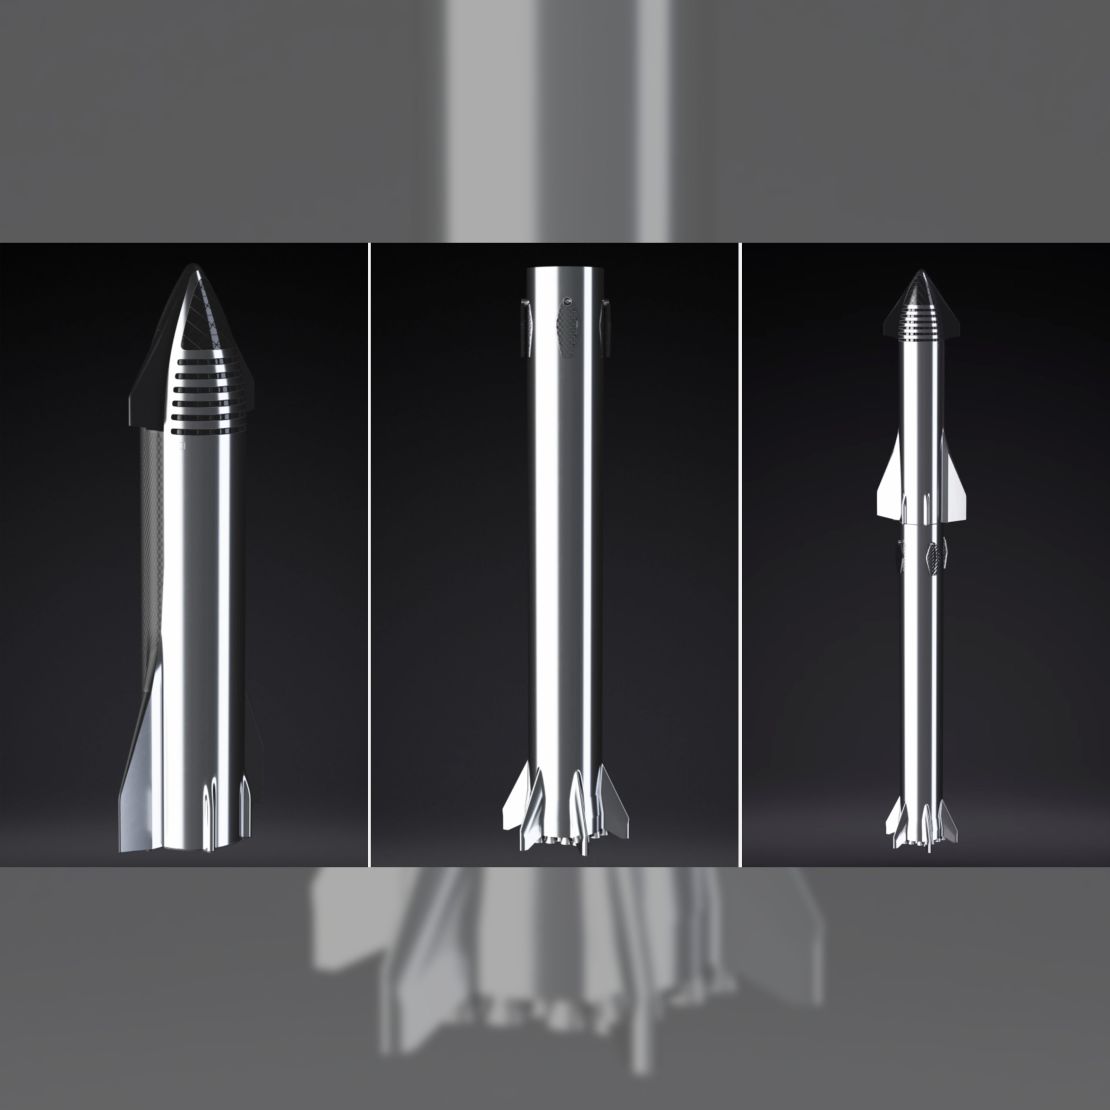 The eventual Starship system will combine the upper portions already tested, along with the Super Heavy rocket booster.